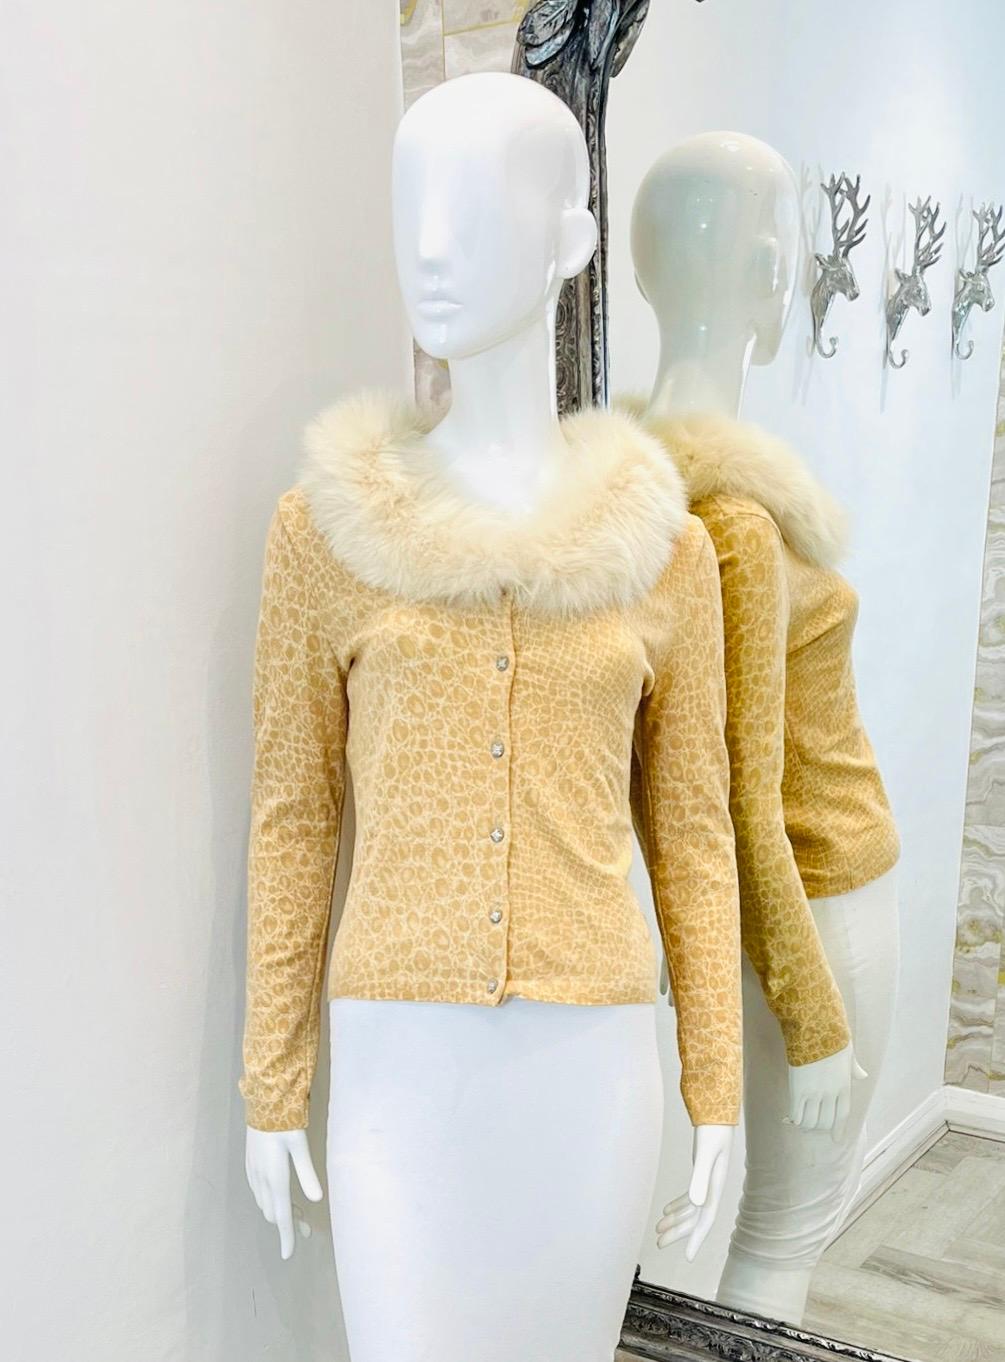 Blumarine Fur Trimmed Cardigan

Mustard knitwear designed with animal print and ivory faux fur trimmed neckline.

Detailed with sequin embellished centre button closure and fitted silhouette.

Size – 44IT

Condition – Very Good

Composition – 96%